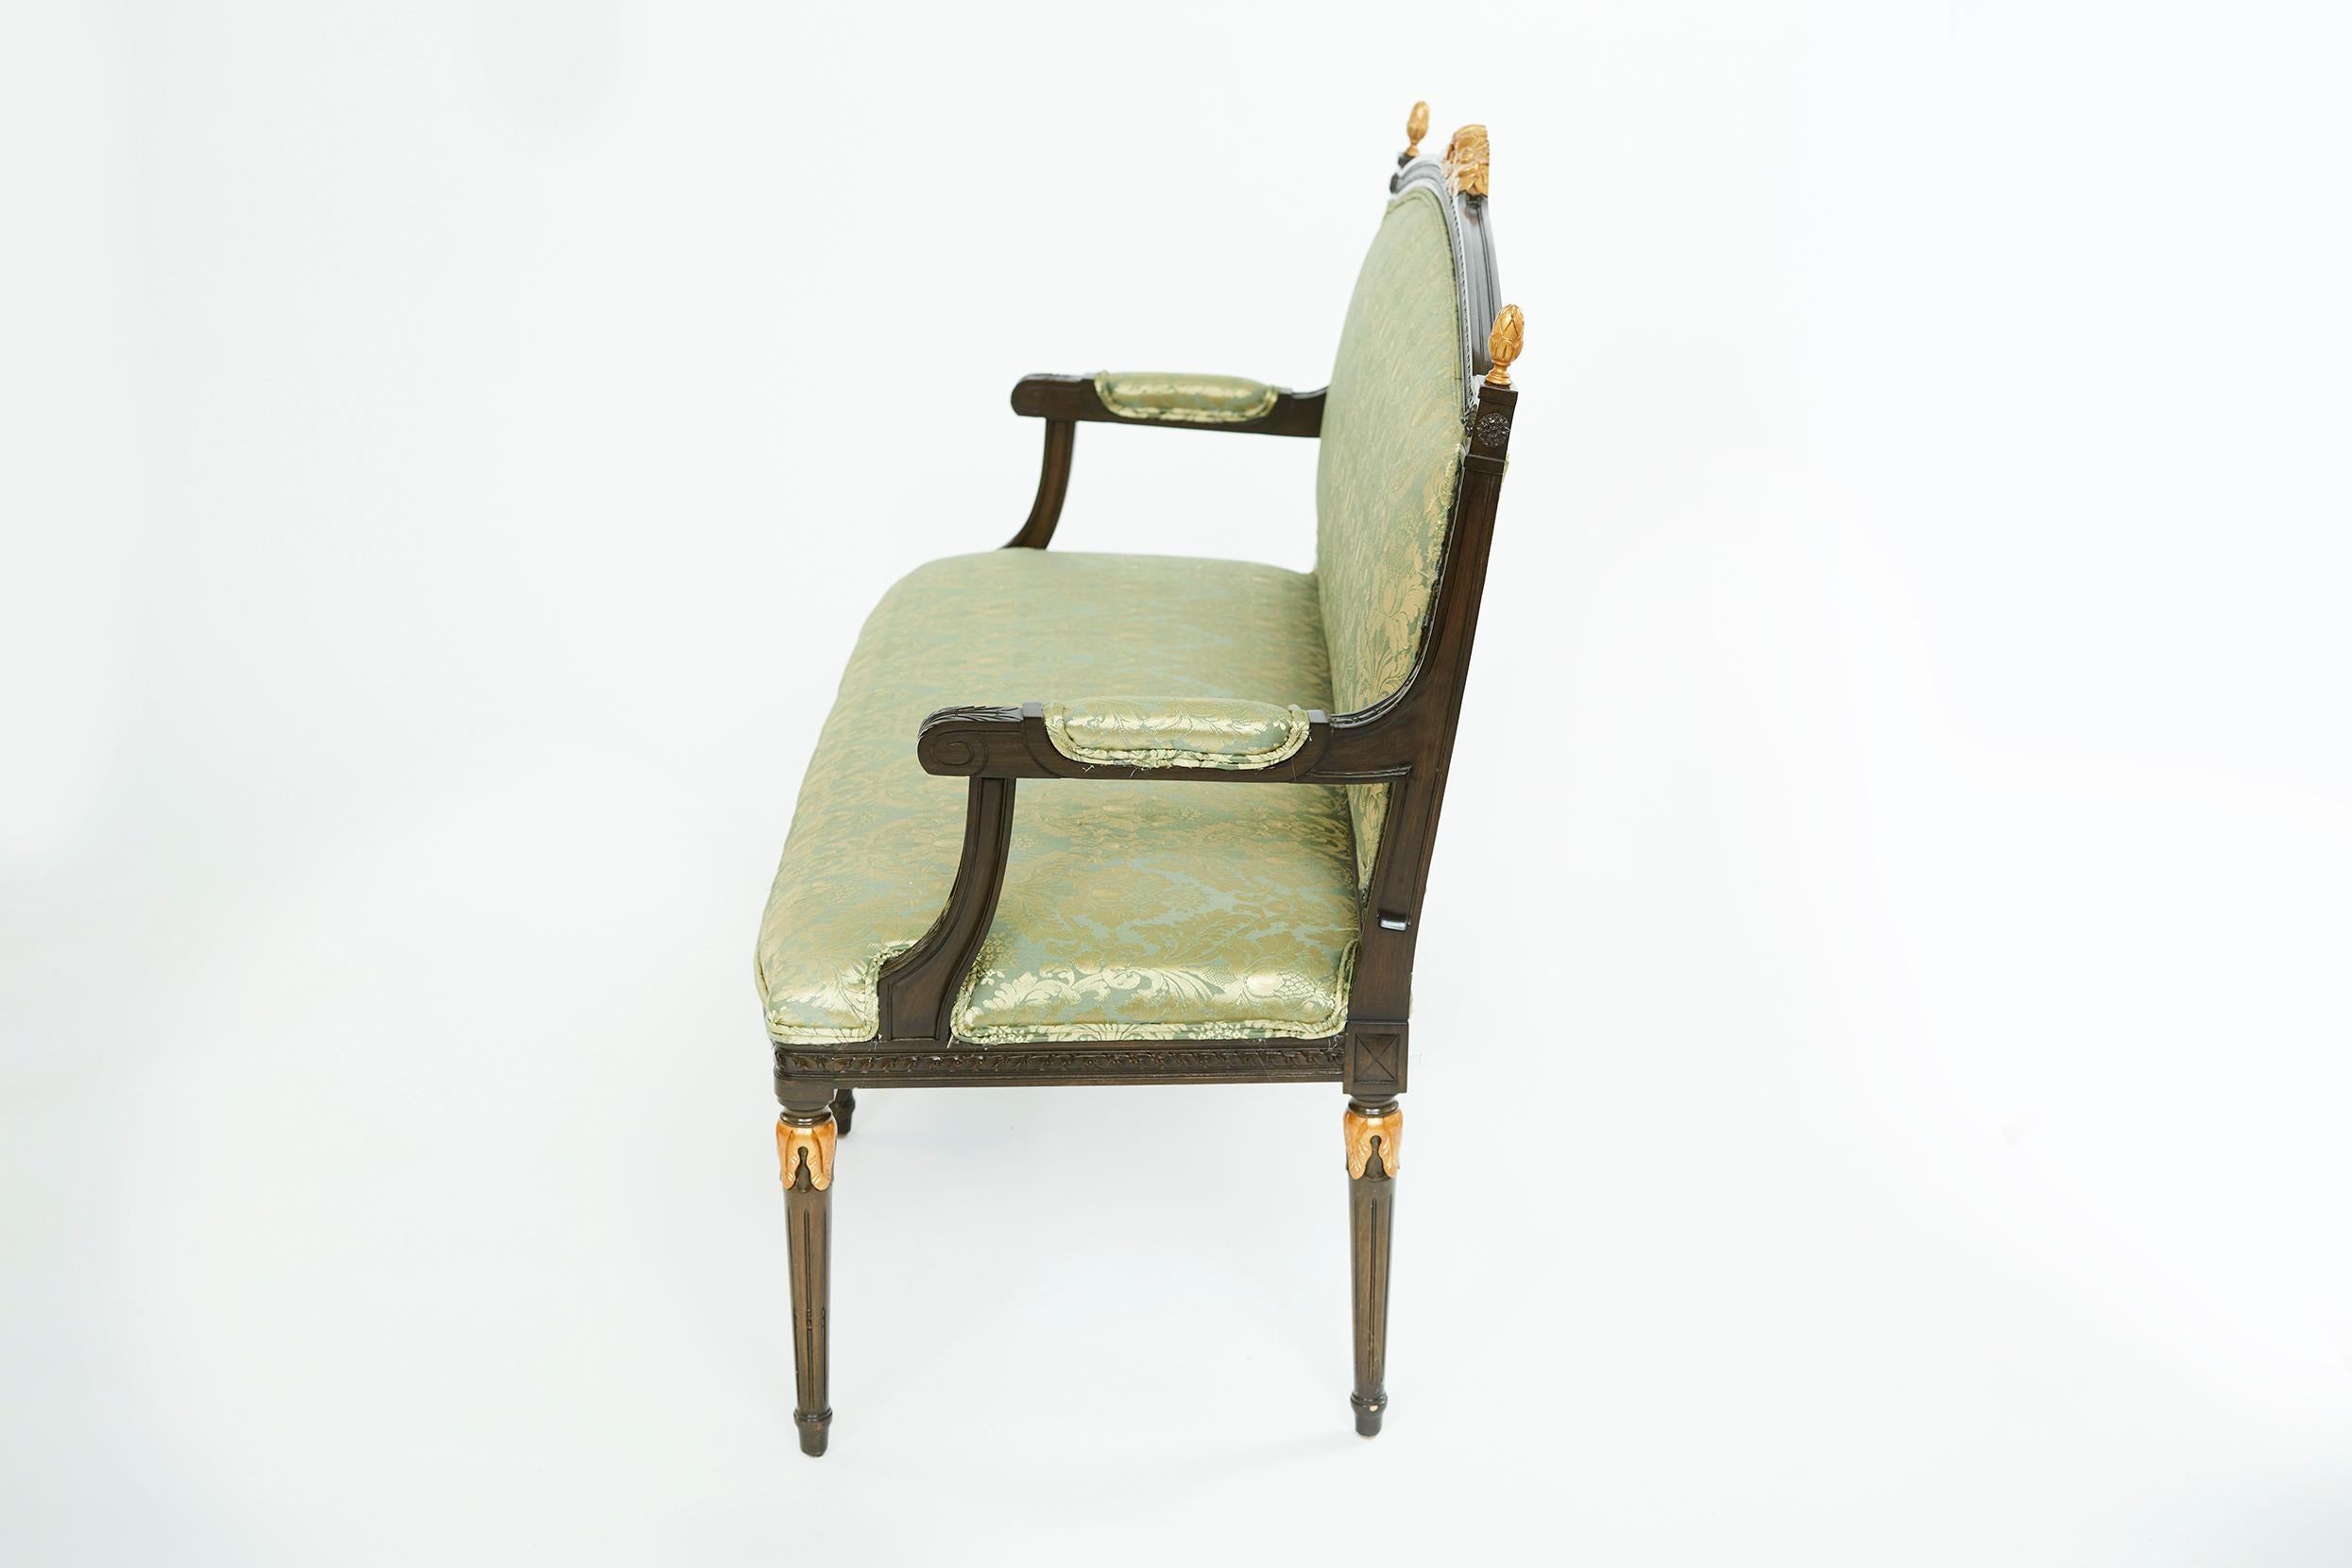 Late 19th century painted / gilt wood framed Louis XVI style settee with green blended silk damask upholstered seat . The settee is in excellent antique condition. Very sturdy and the upholstery is very immaculate. The settee measure 52 inches